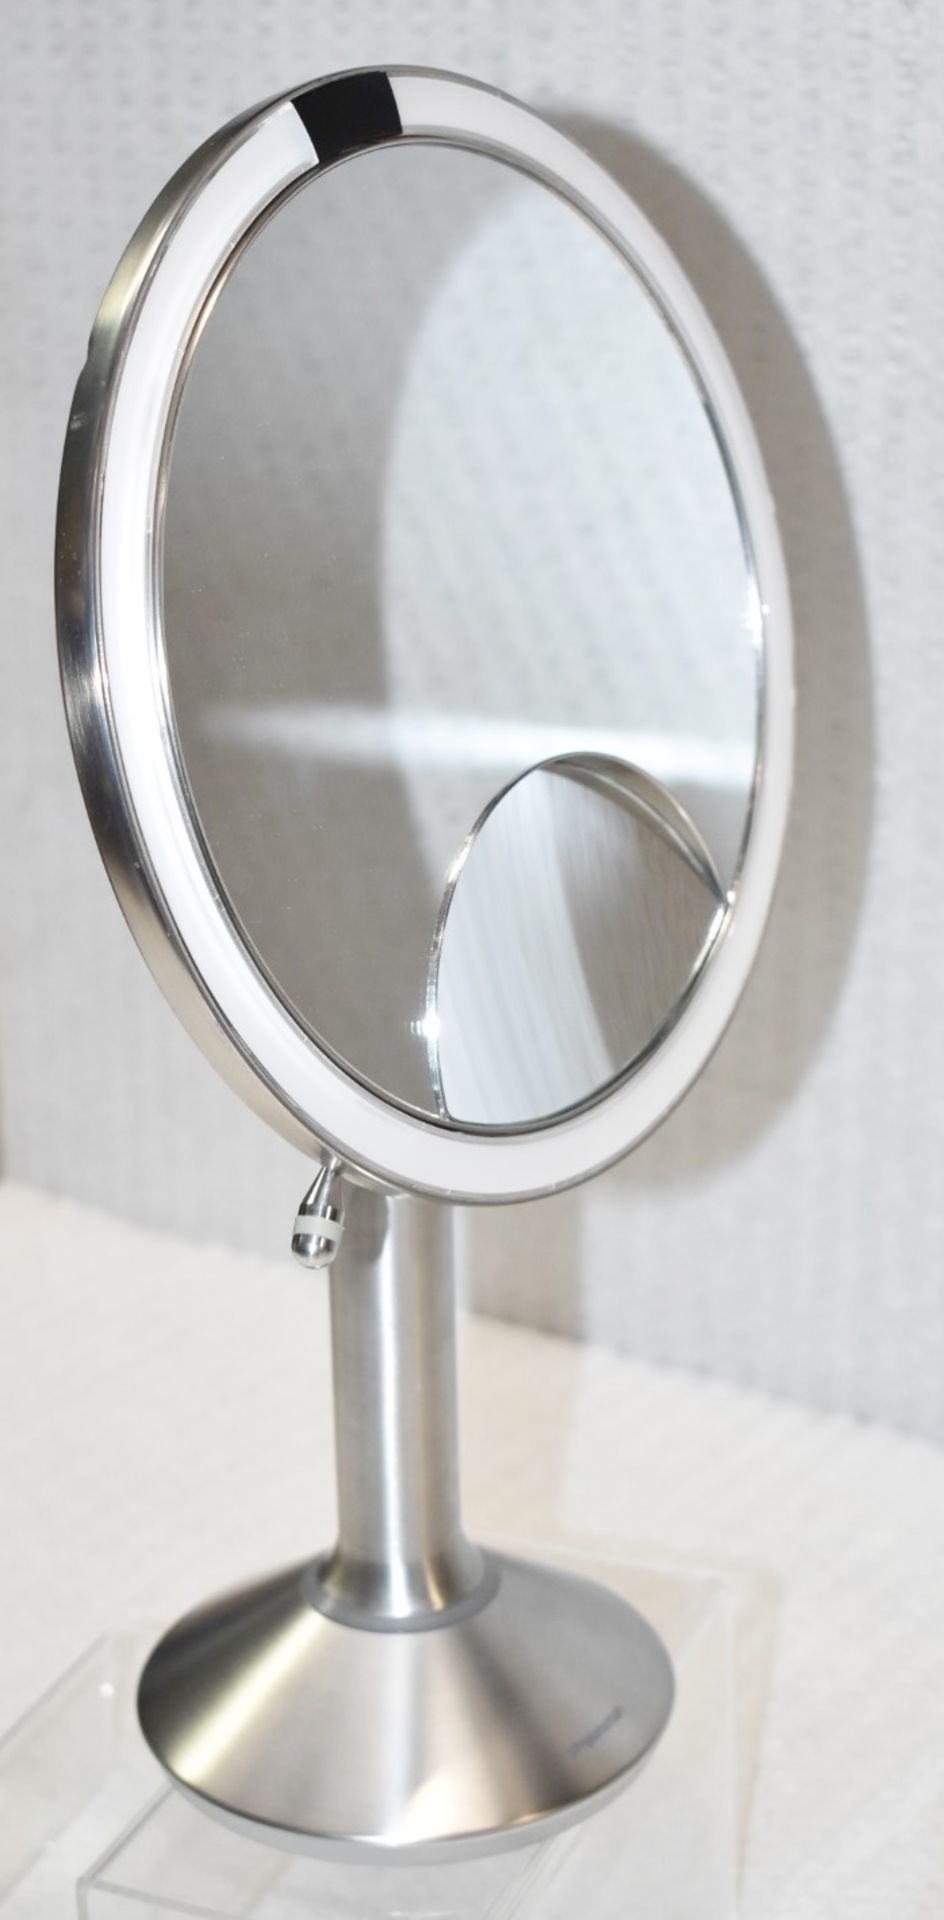 1 x SIMPLEHUMAN Stainless Steel Trio Touch Control Mirror - Original Price £289.95 - Image 2 of 7